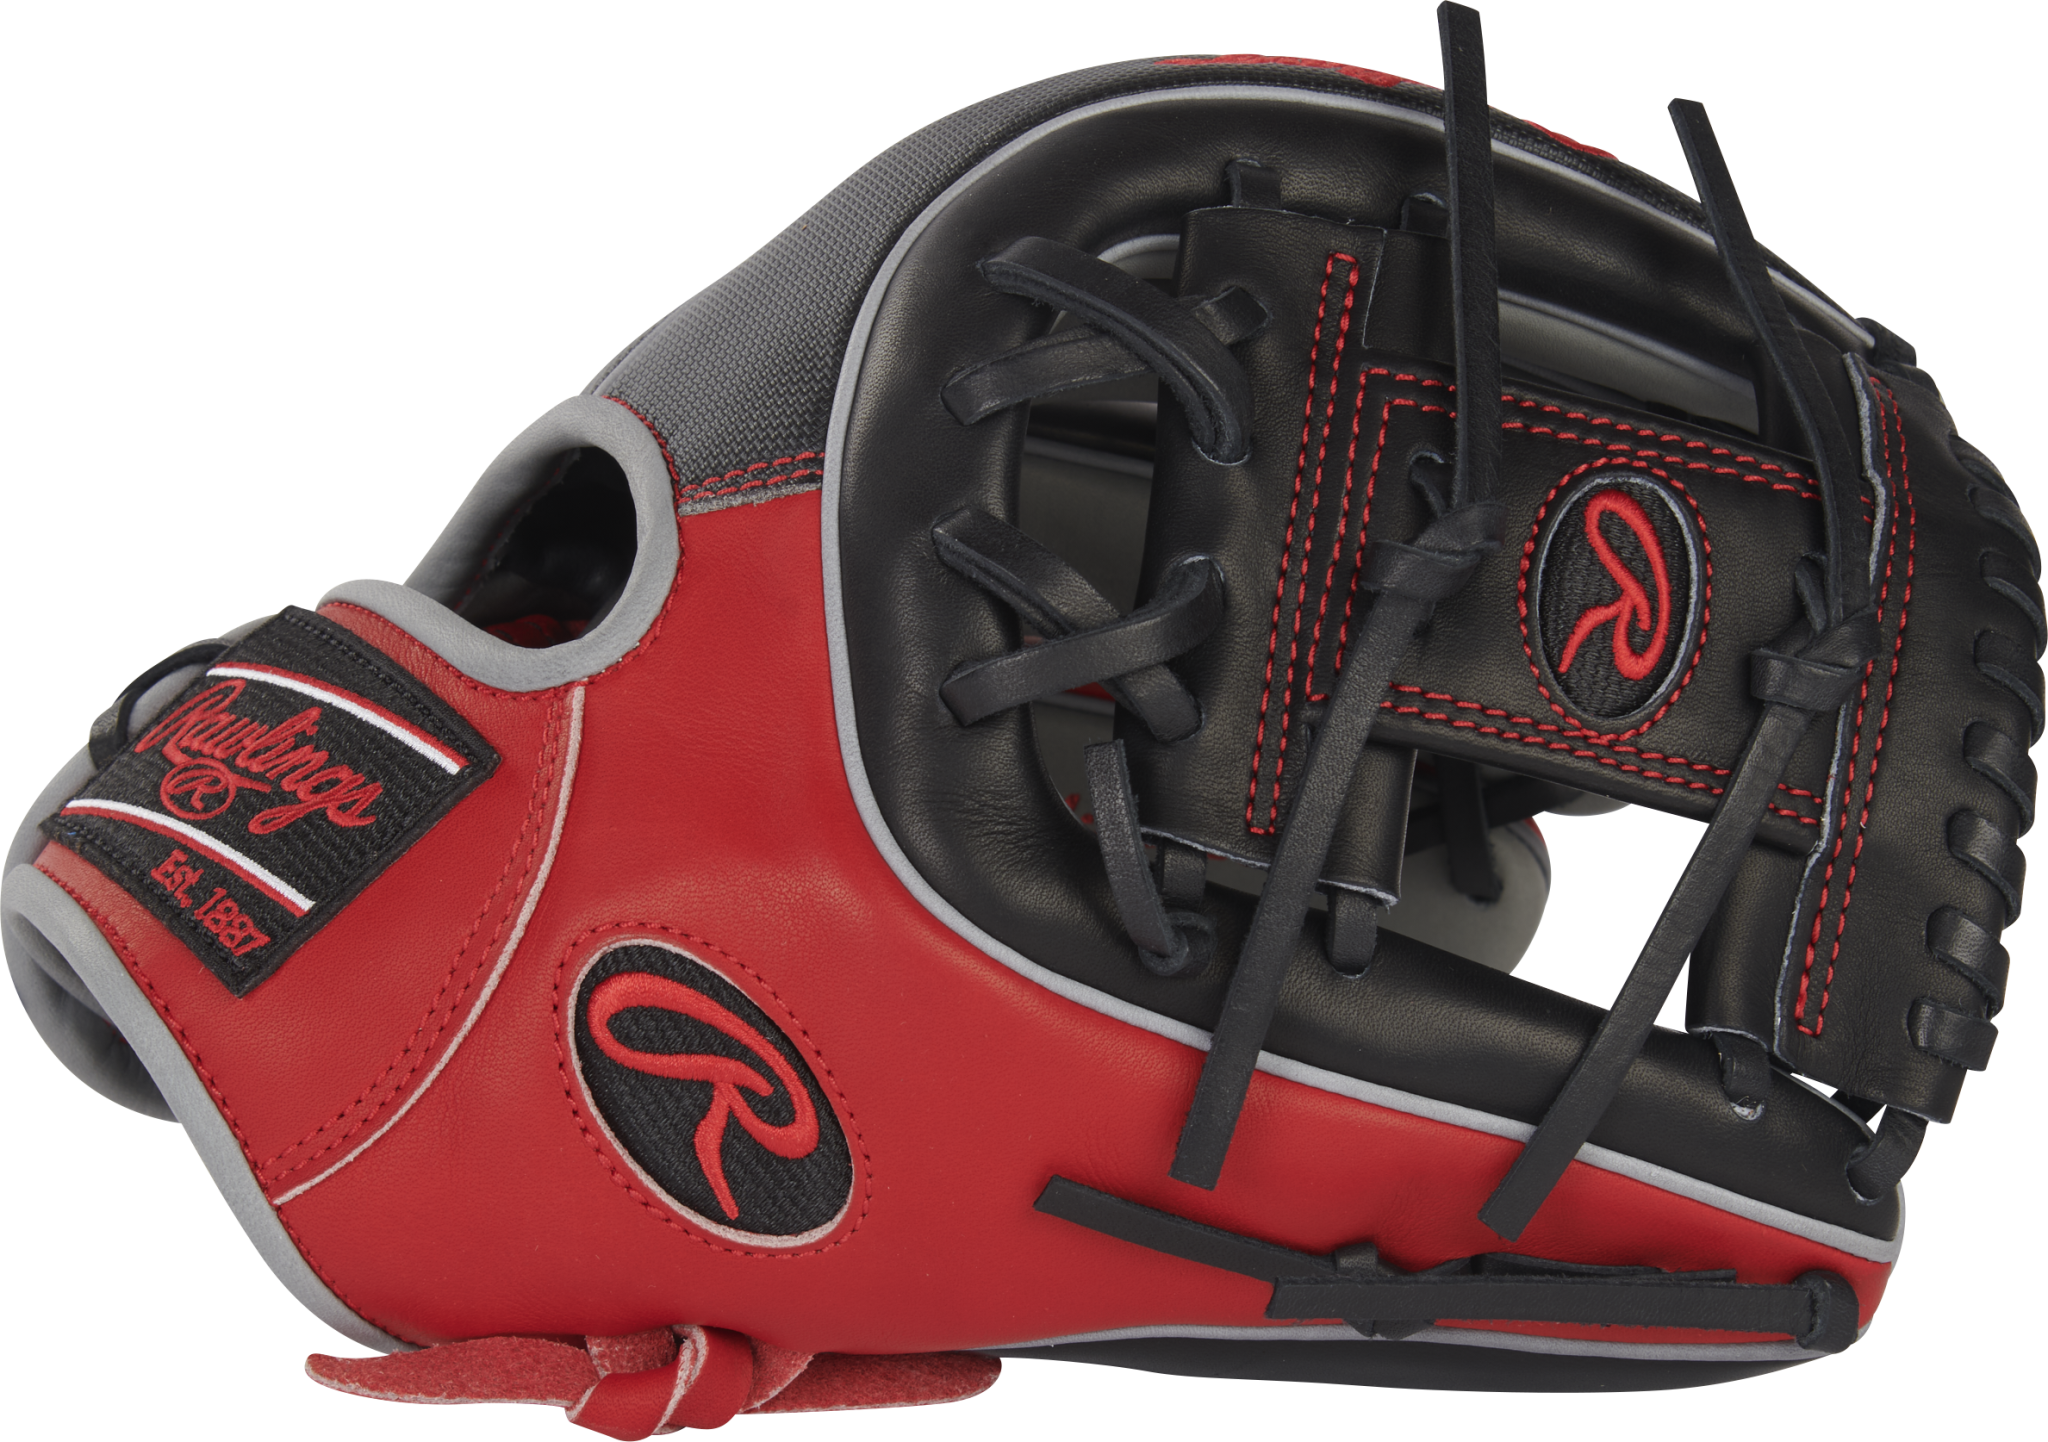 Rawlings May 2022 Gold Glove Club (GOTM) 11.75-inch Infield Heart of the Hide Red/Black/Grey